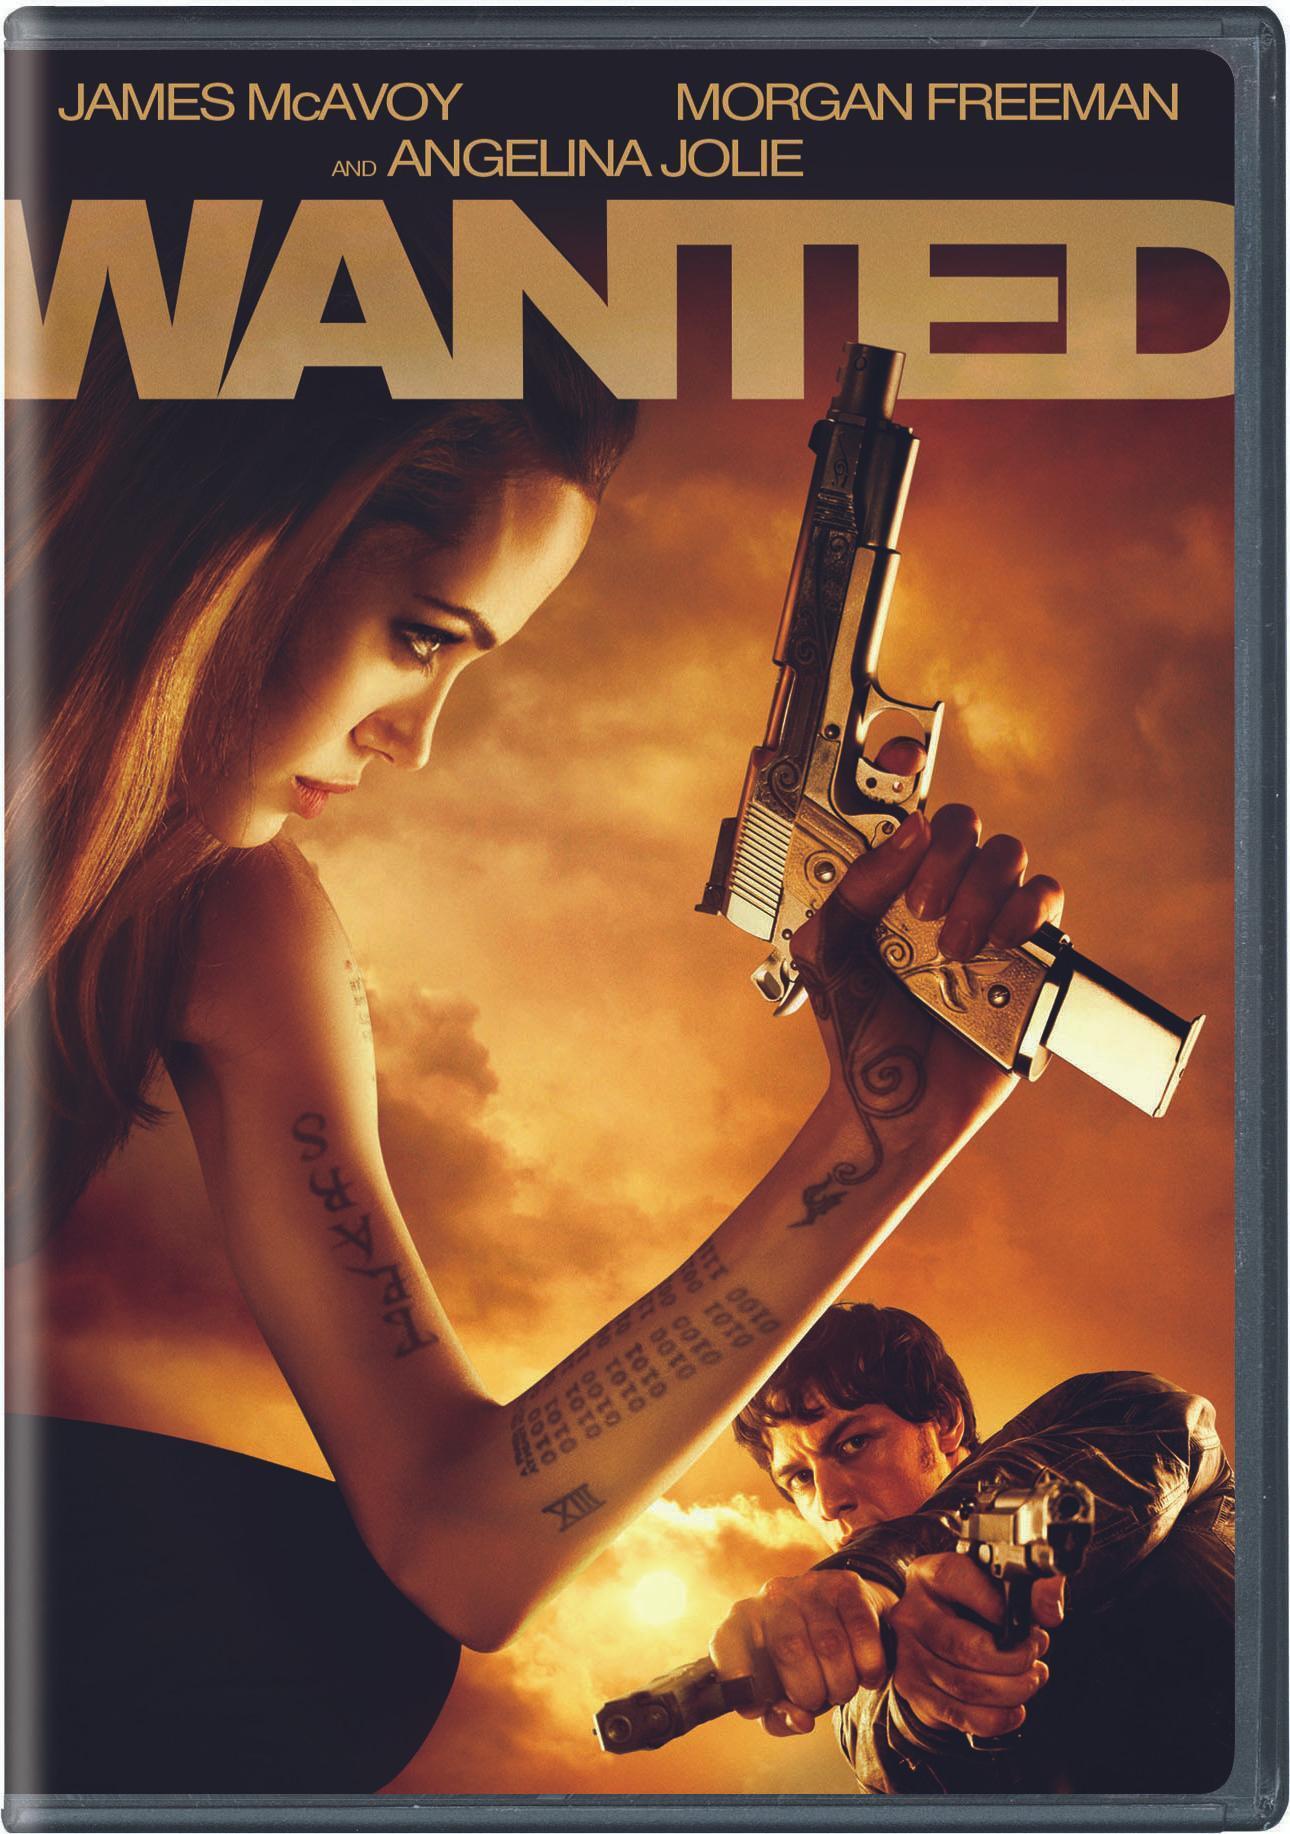 Wanted (DVD Widescreen) - DVD [ 2008 ]  - Action Movies On DVD - Movies On GRUV